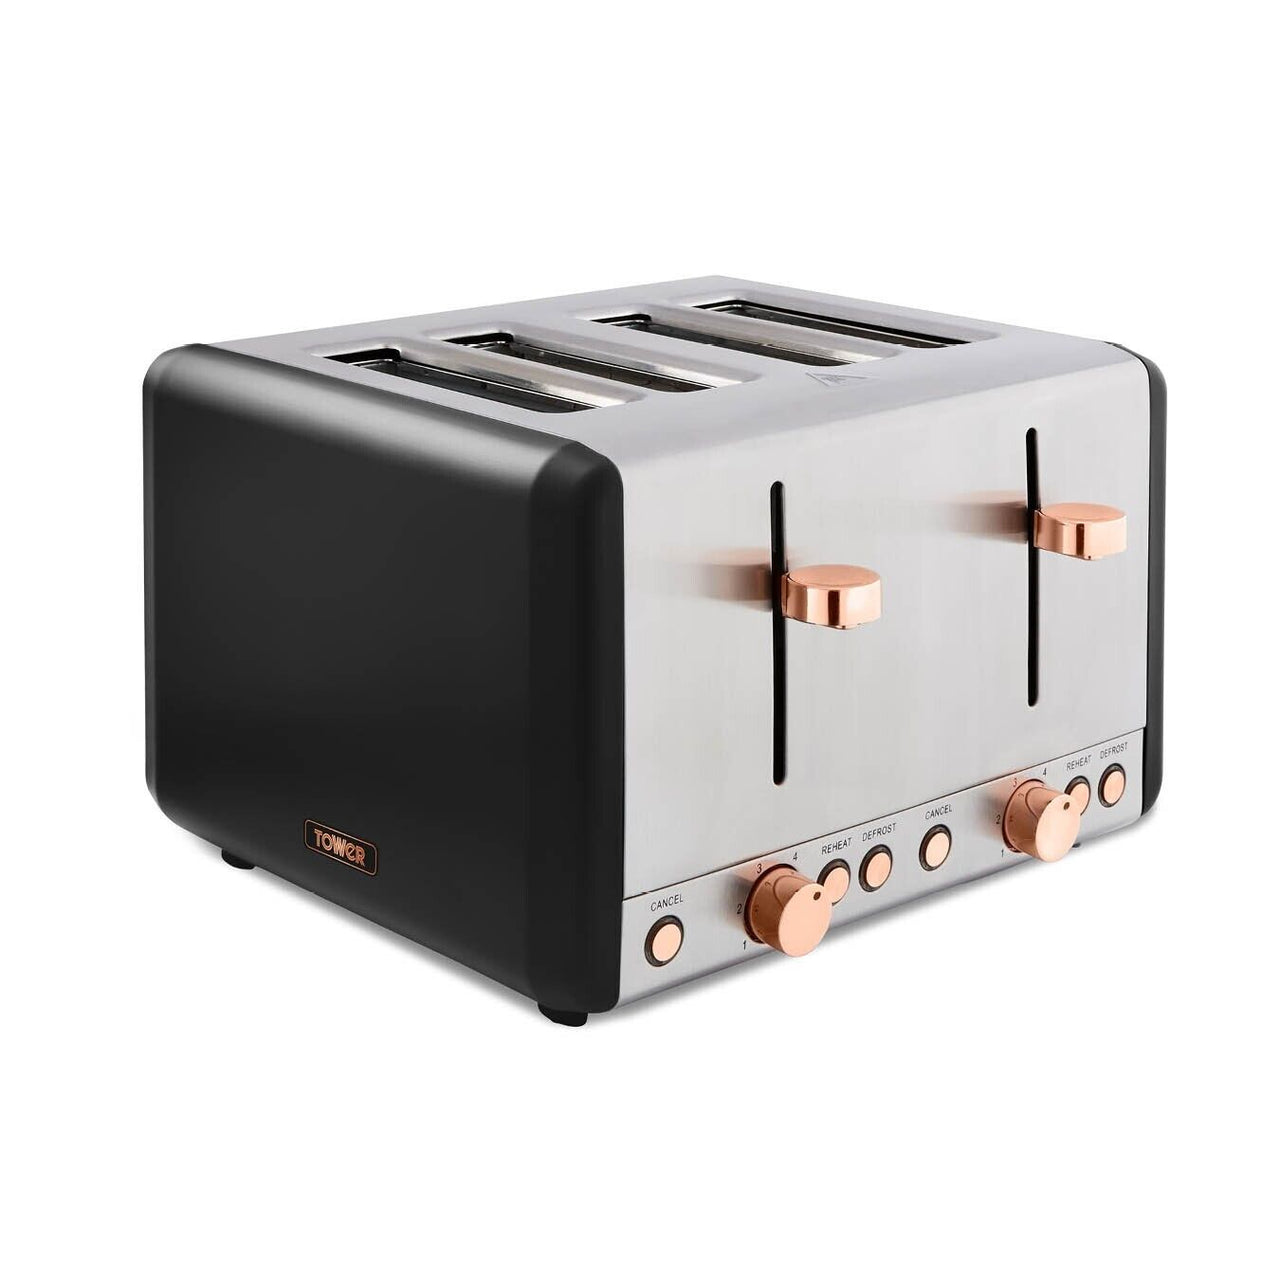 Tower Cavaletto Black & Rose Gold 4 Slice Toaster T20051RG 3 Year Guarantee